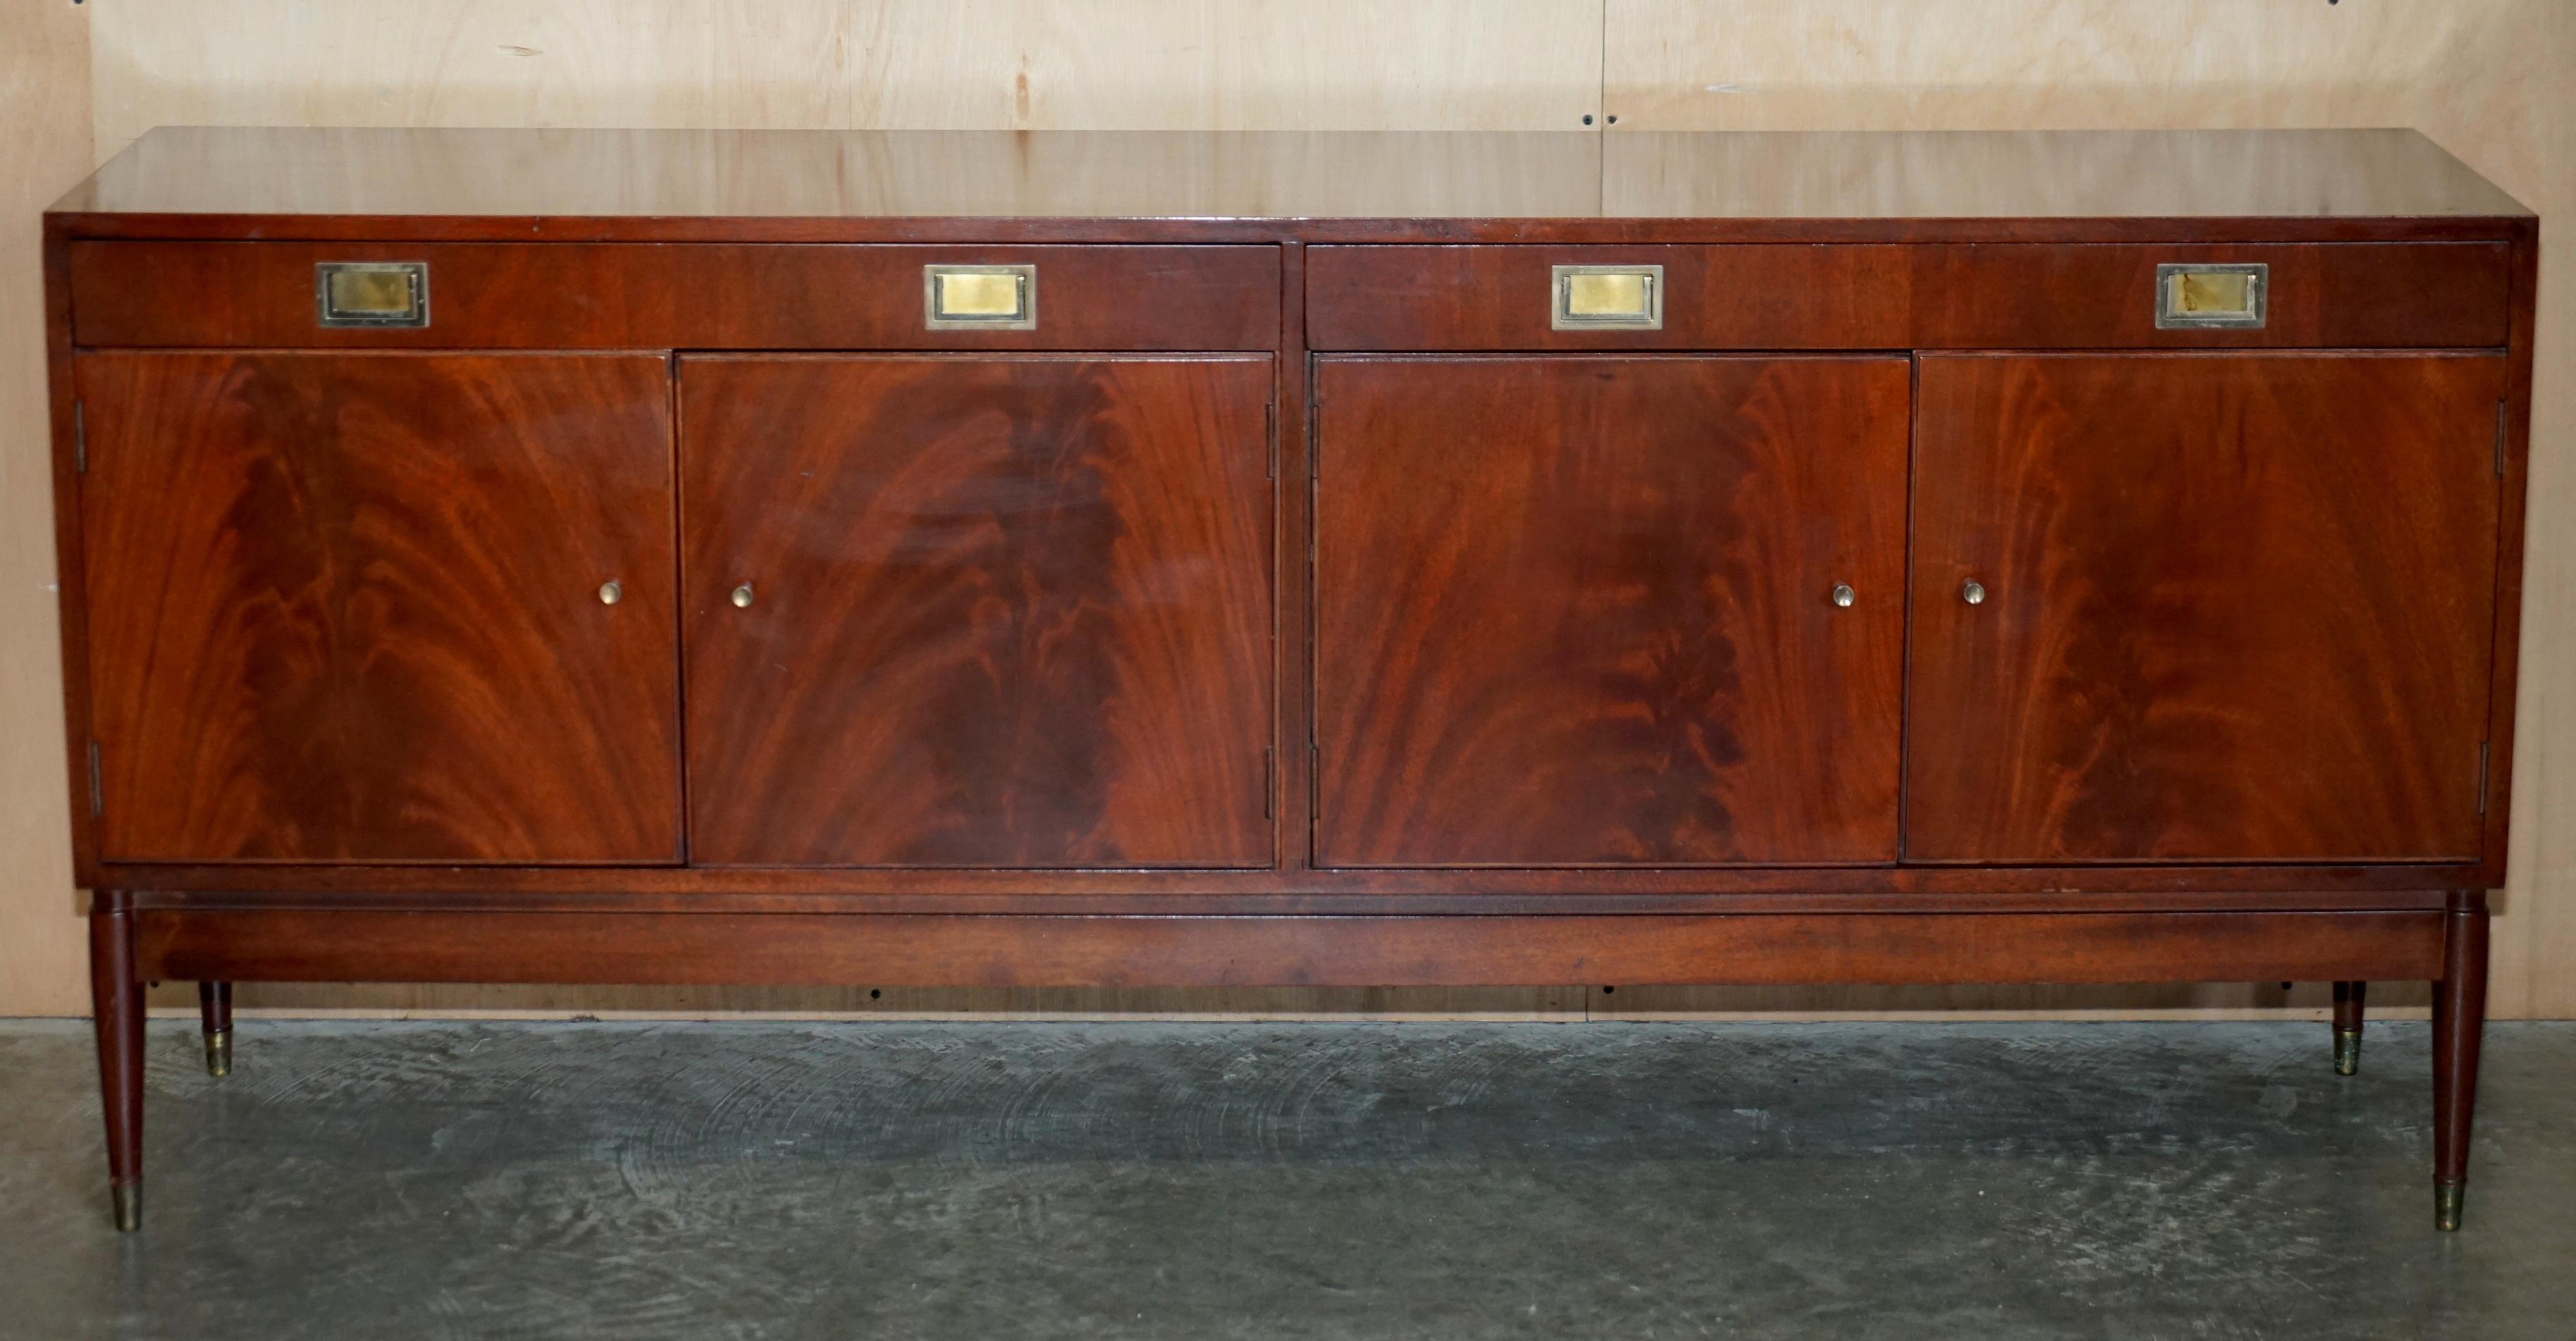 We are delighted to offer for sale this stunning original 15th June 1966 stamped Greaves & Thomas flamed mahogany with campaign handles sideboard model number 5213.

A very good looking well made and decorative piece of Mid Century Modern